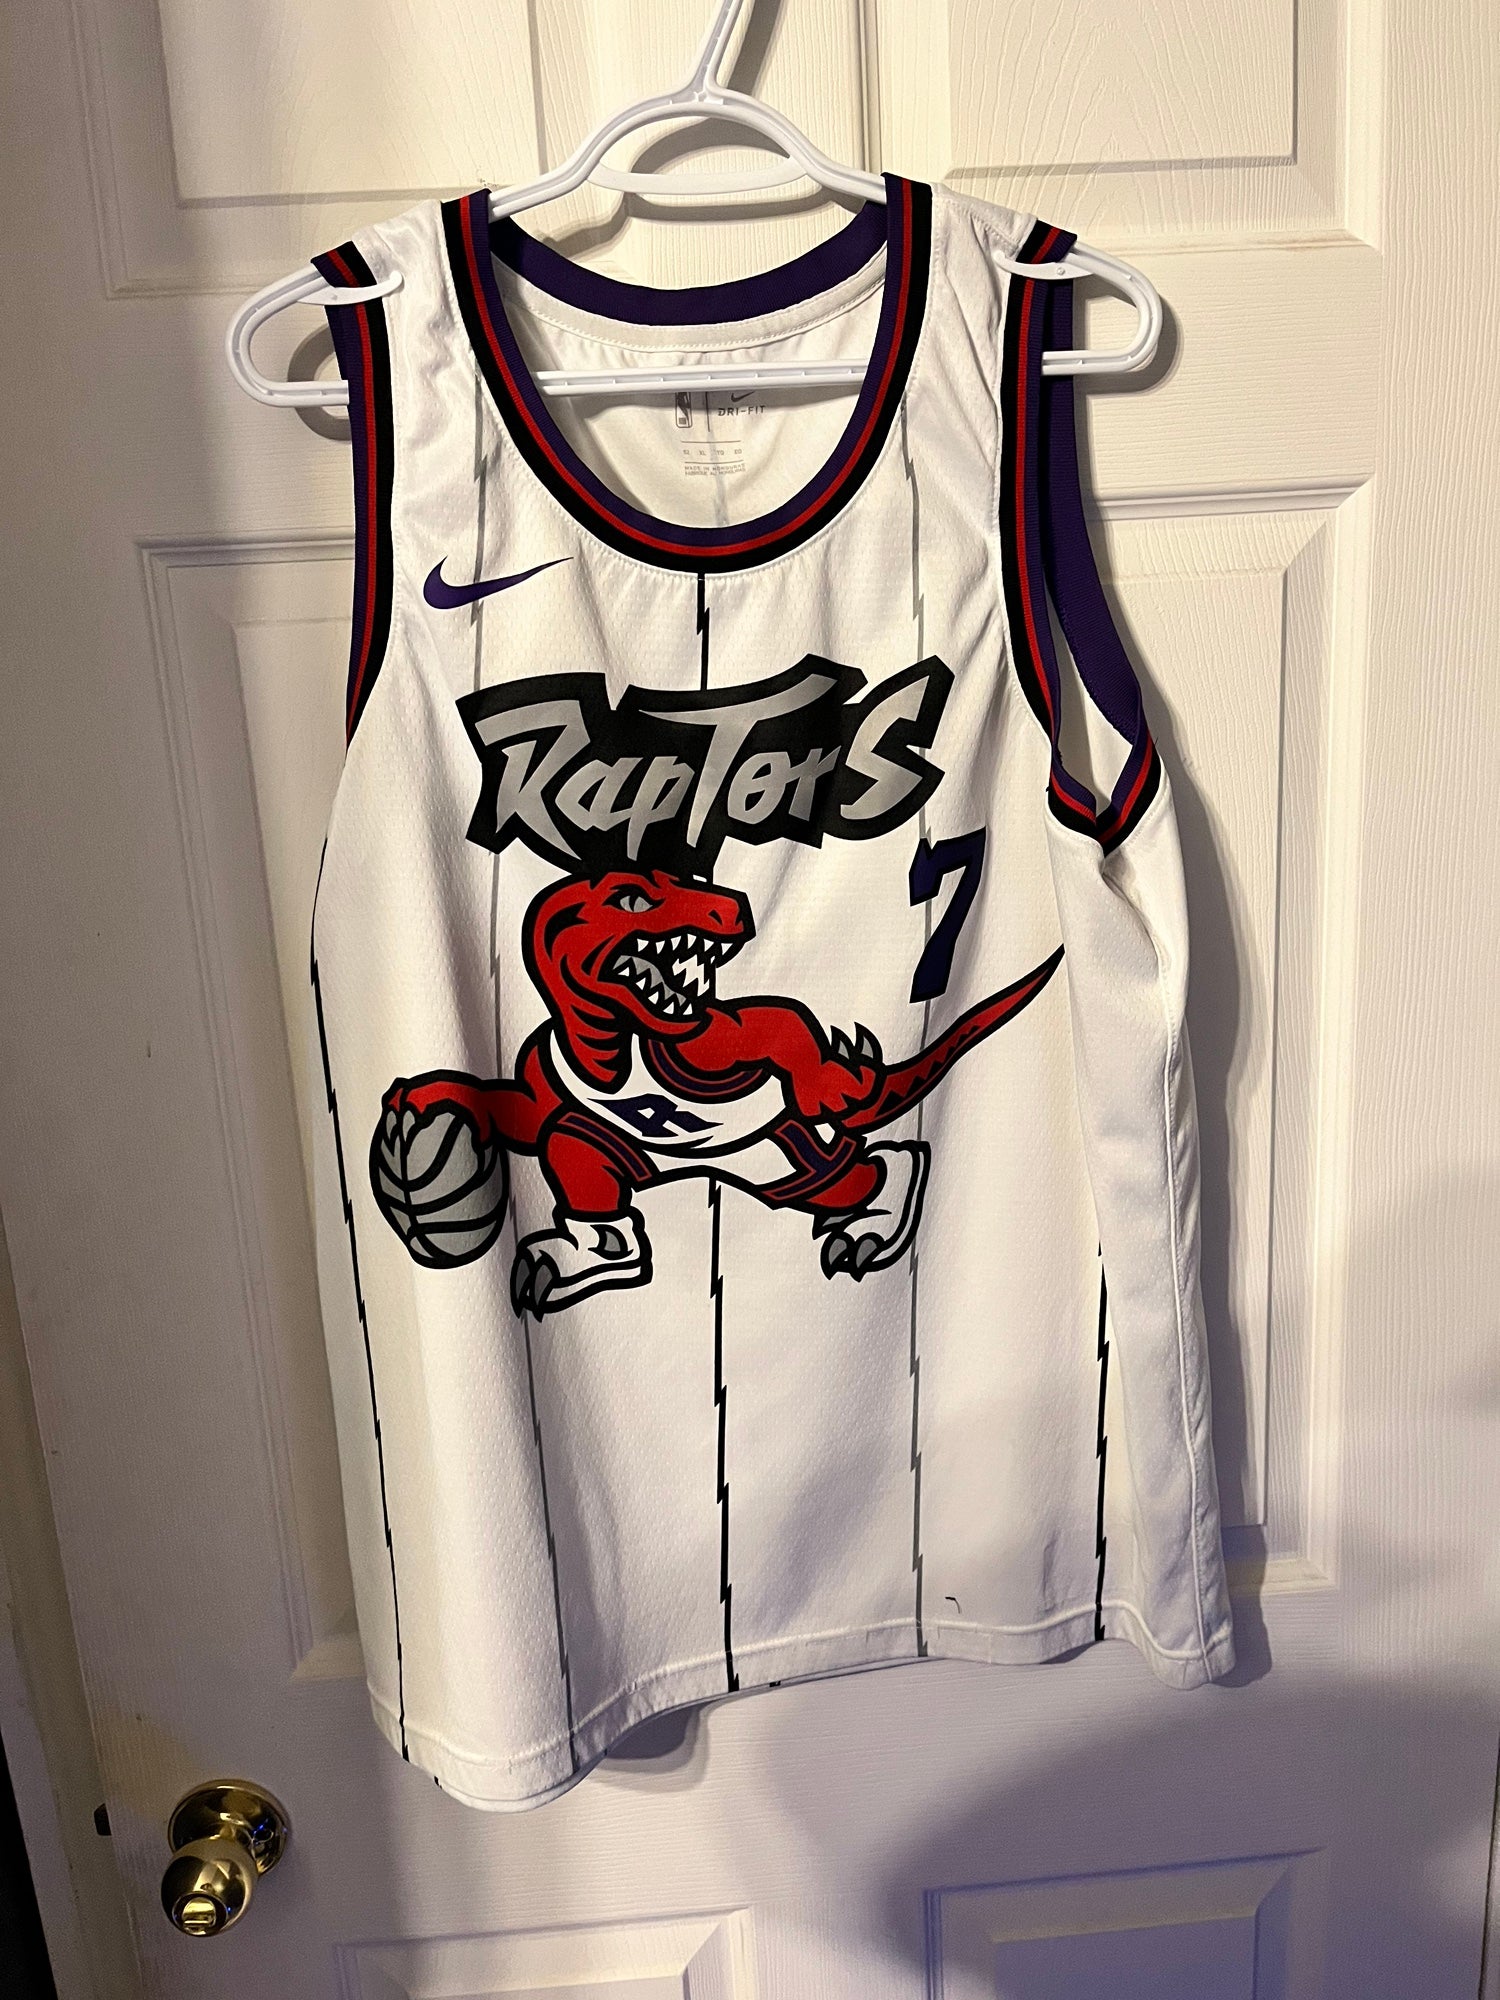 lowry throwback jersey